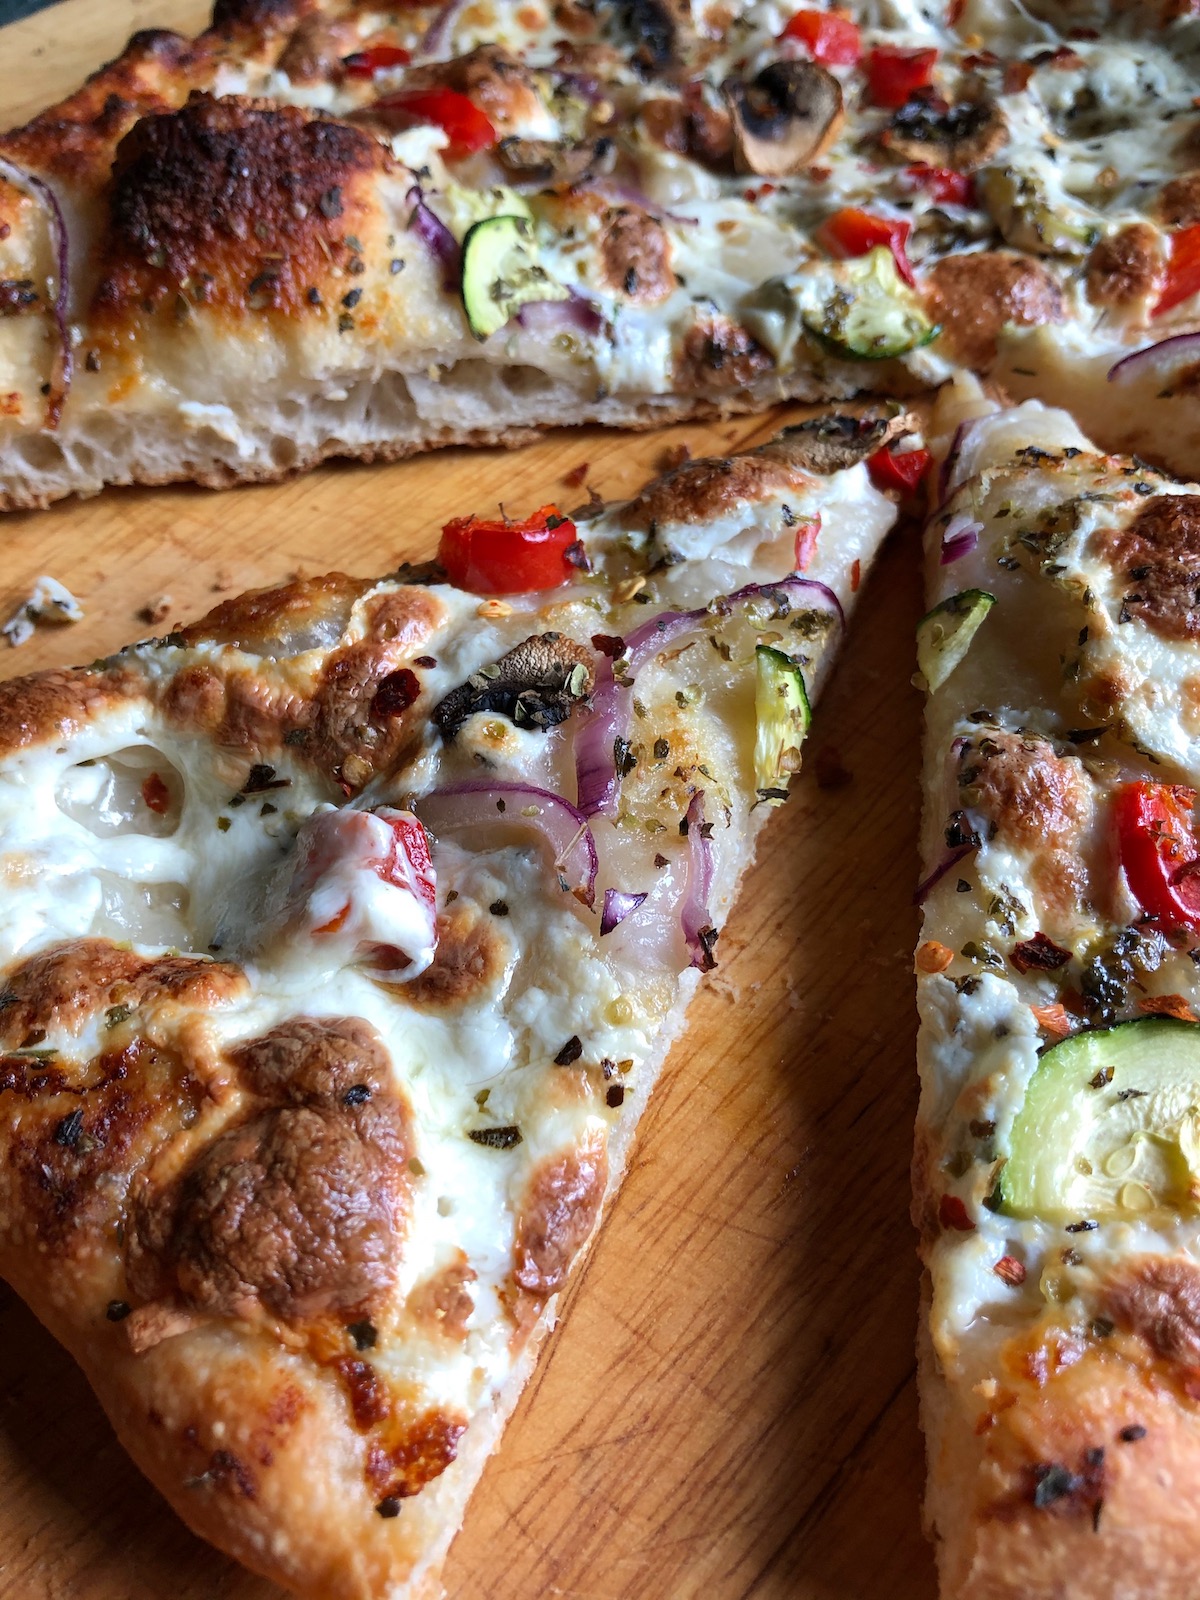 A pizza topped with roasted garlic white pizza sauce, fresh mozzarella, red peppers, mushrooms, zucchini, and red onions is photographed from a low angle lying on a light-colored wood cutting board. A slice has been moved back from the pie so that the development of small bubbles in the layer of crust under the toppings can be seen.